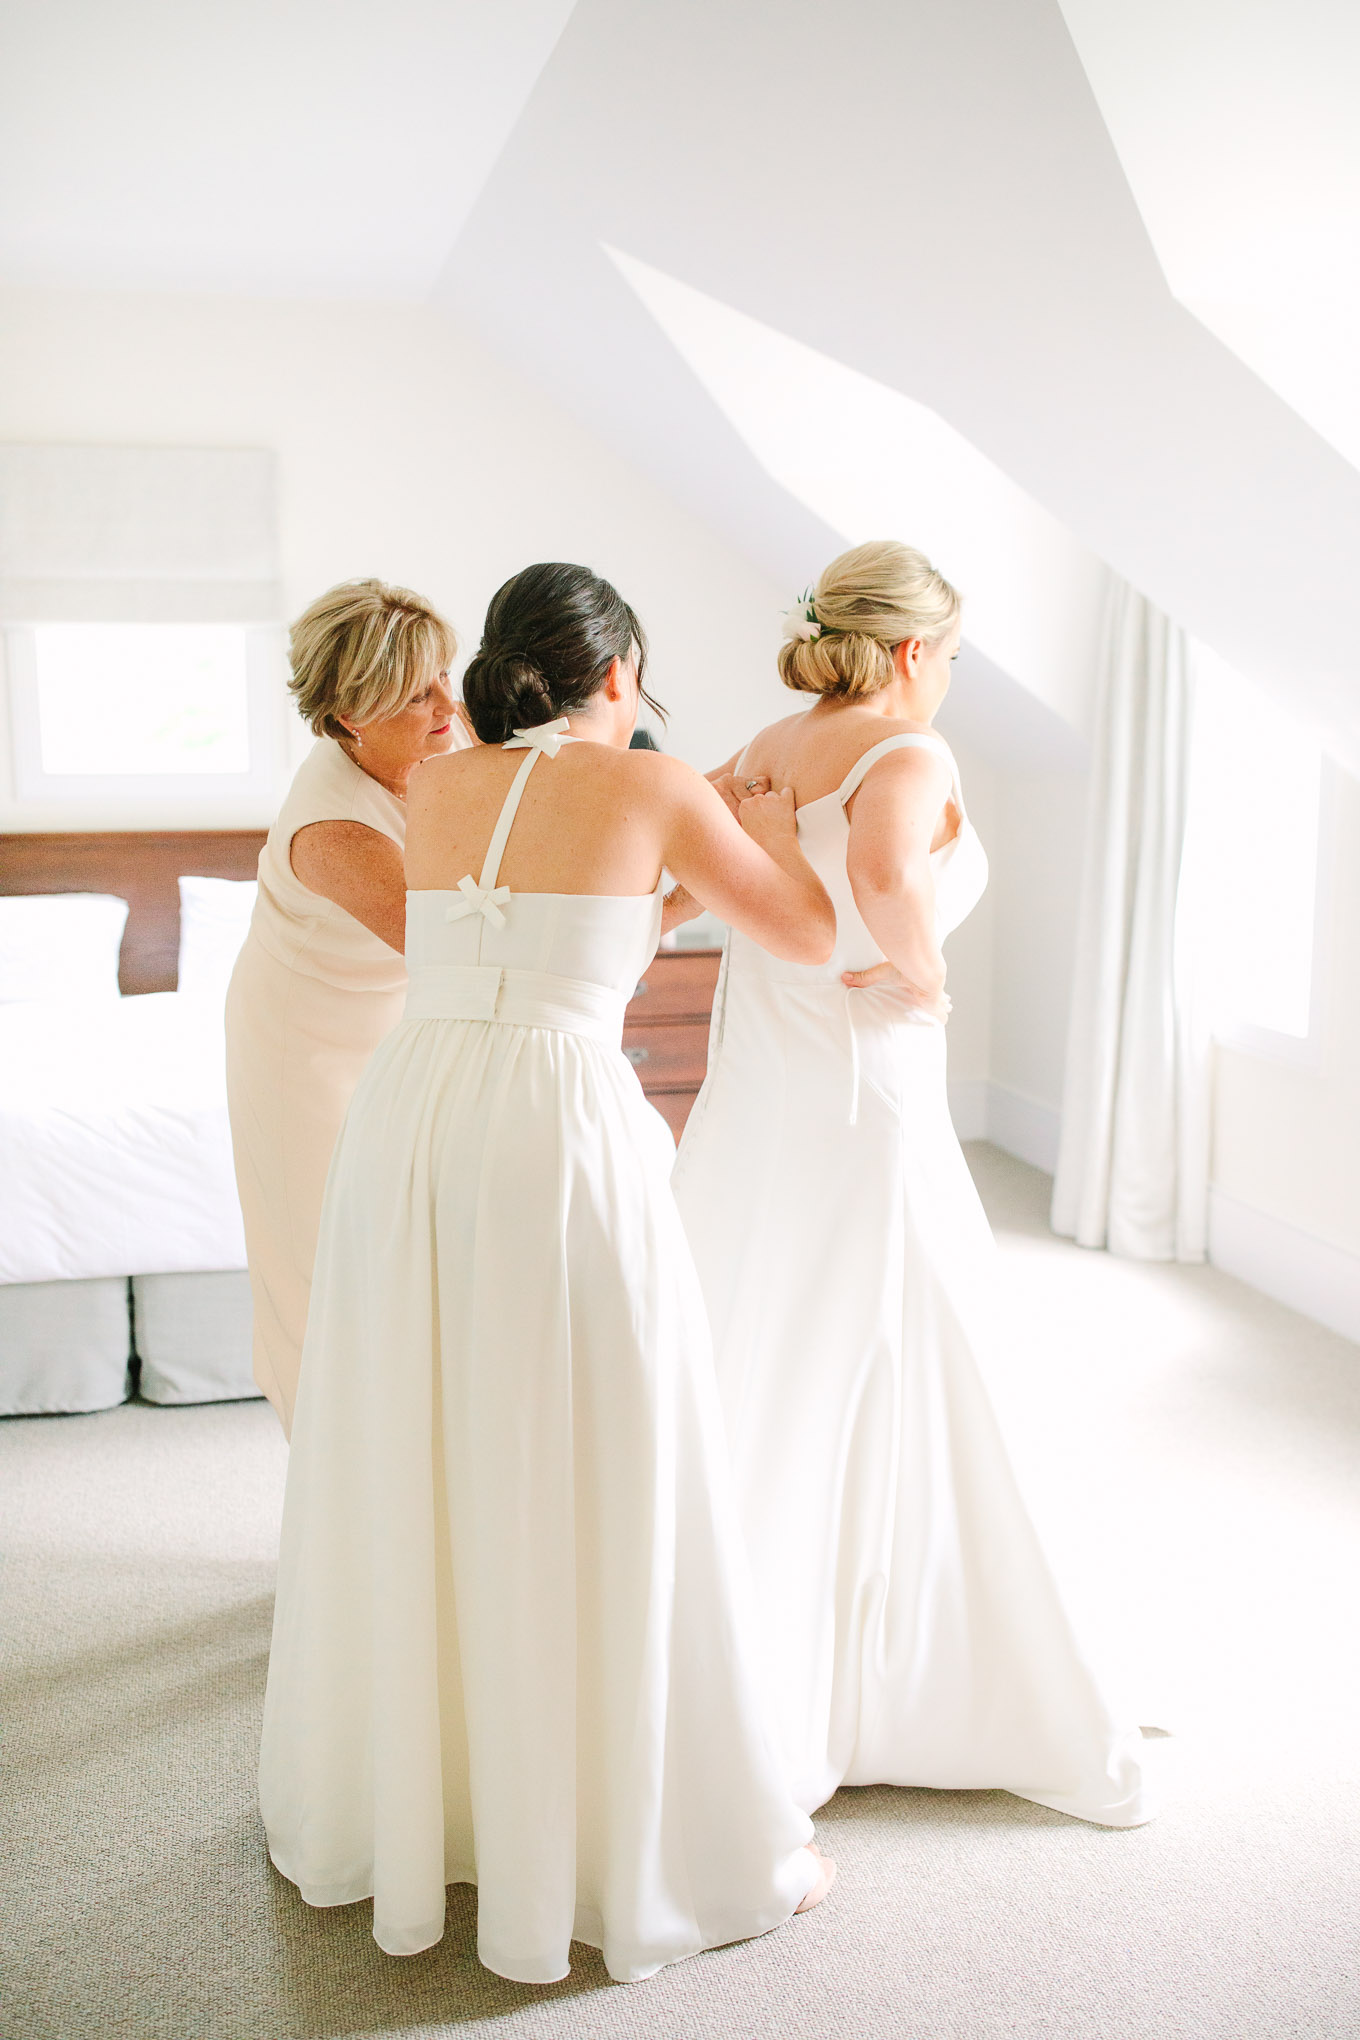 Bride getting dressed in suite. Millbrook Resort Queenstown New Zealand wedding by Mary Costa Photography | www.marycostaweddings.com